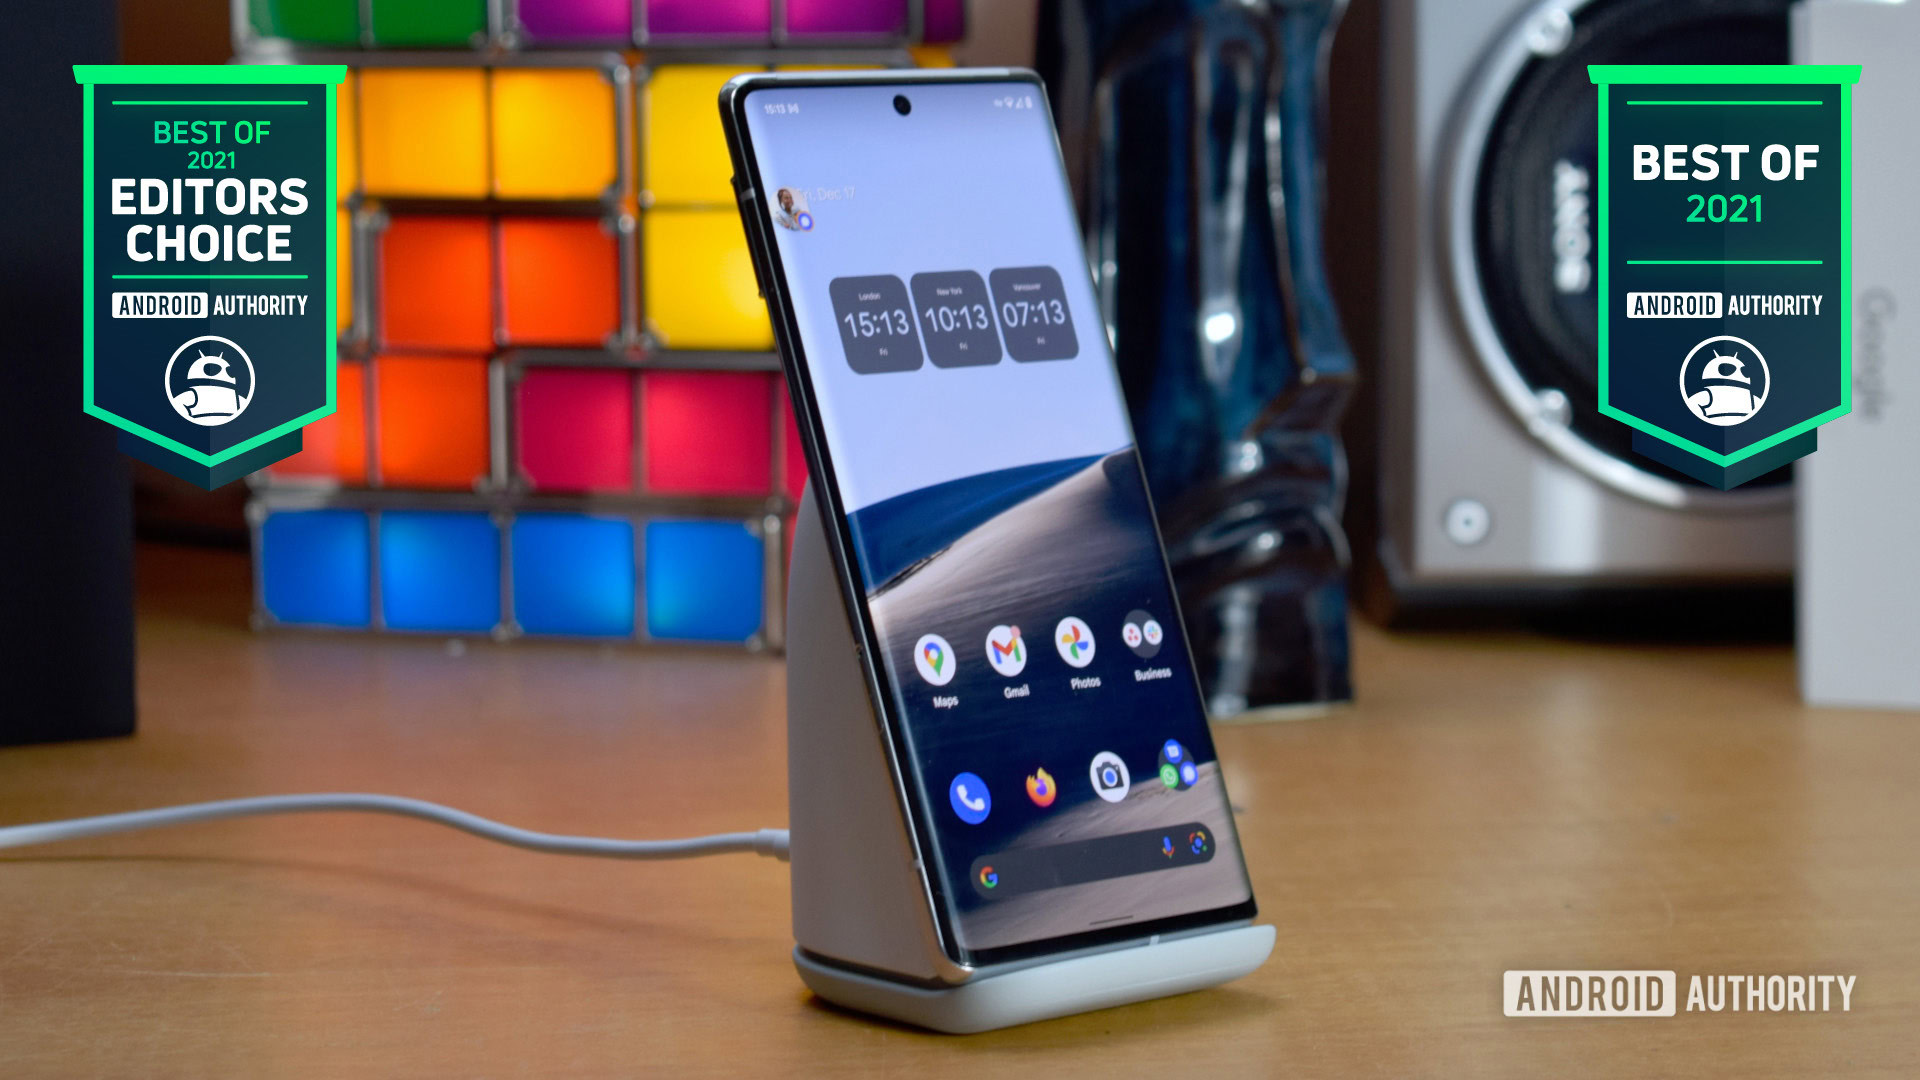 Google Pixel Stand 2nd gen Android Authority Editors Choice and Best of 2021 badge